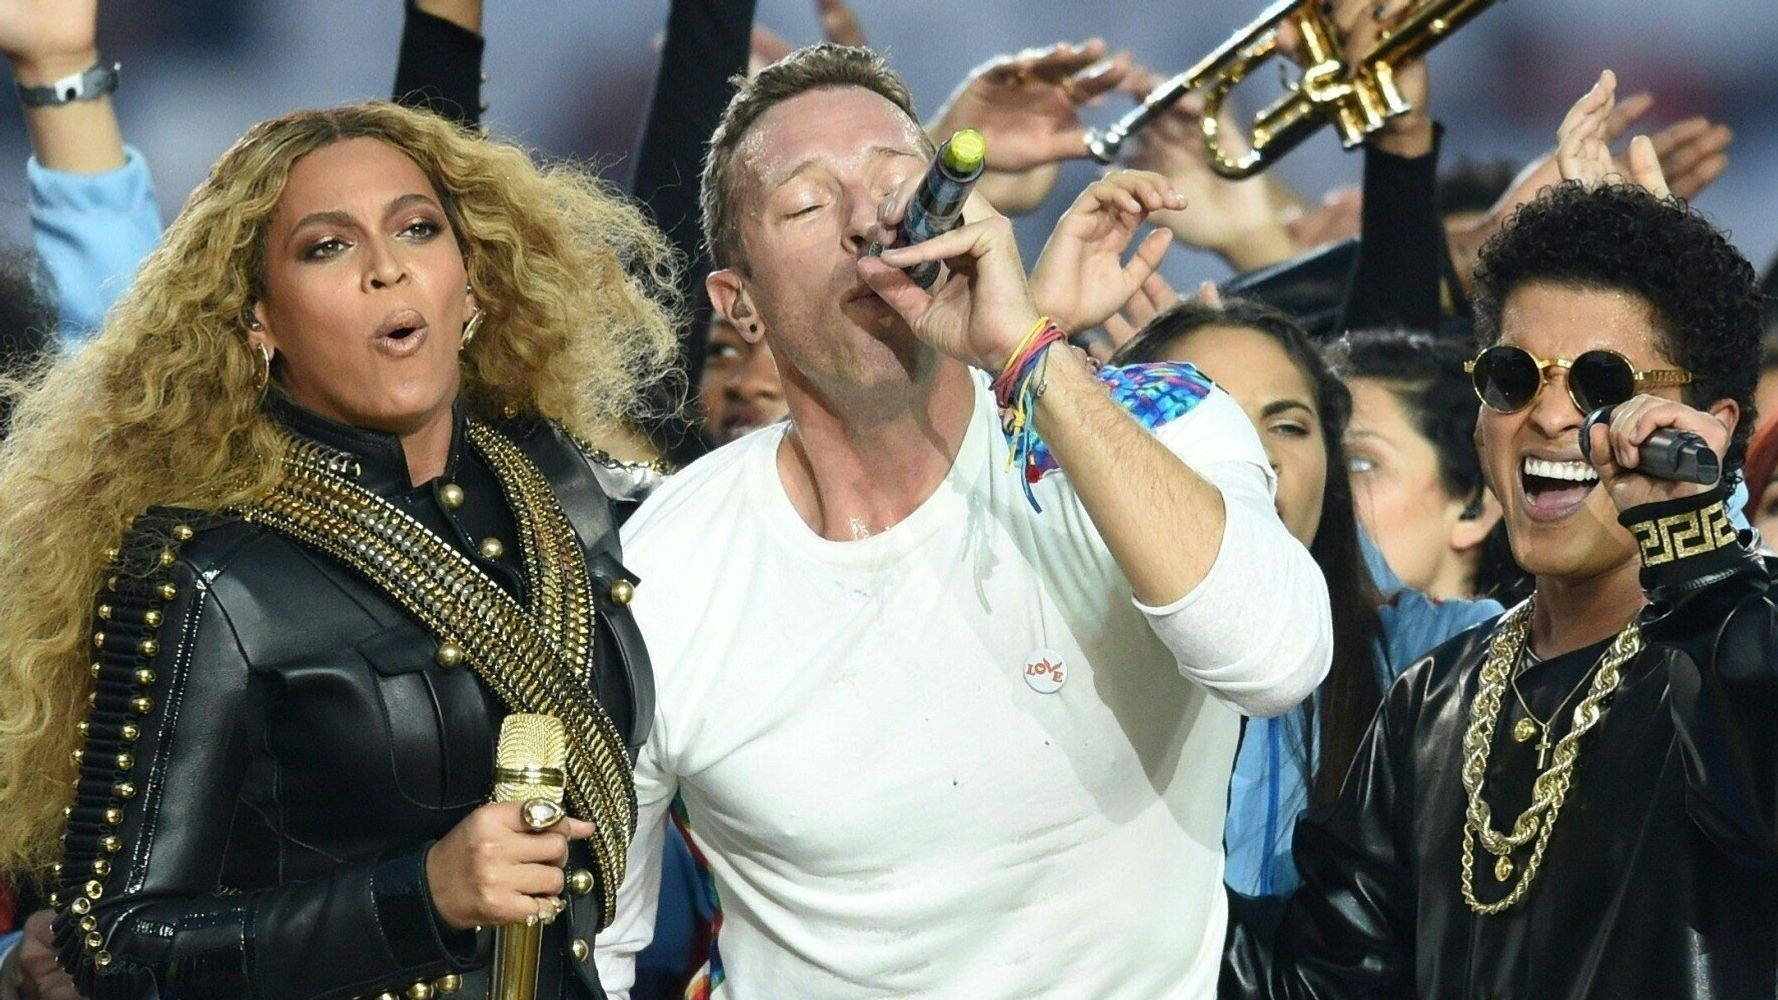 Behind the scenes of Coldplay's Super Bowl halftime show